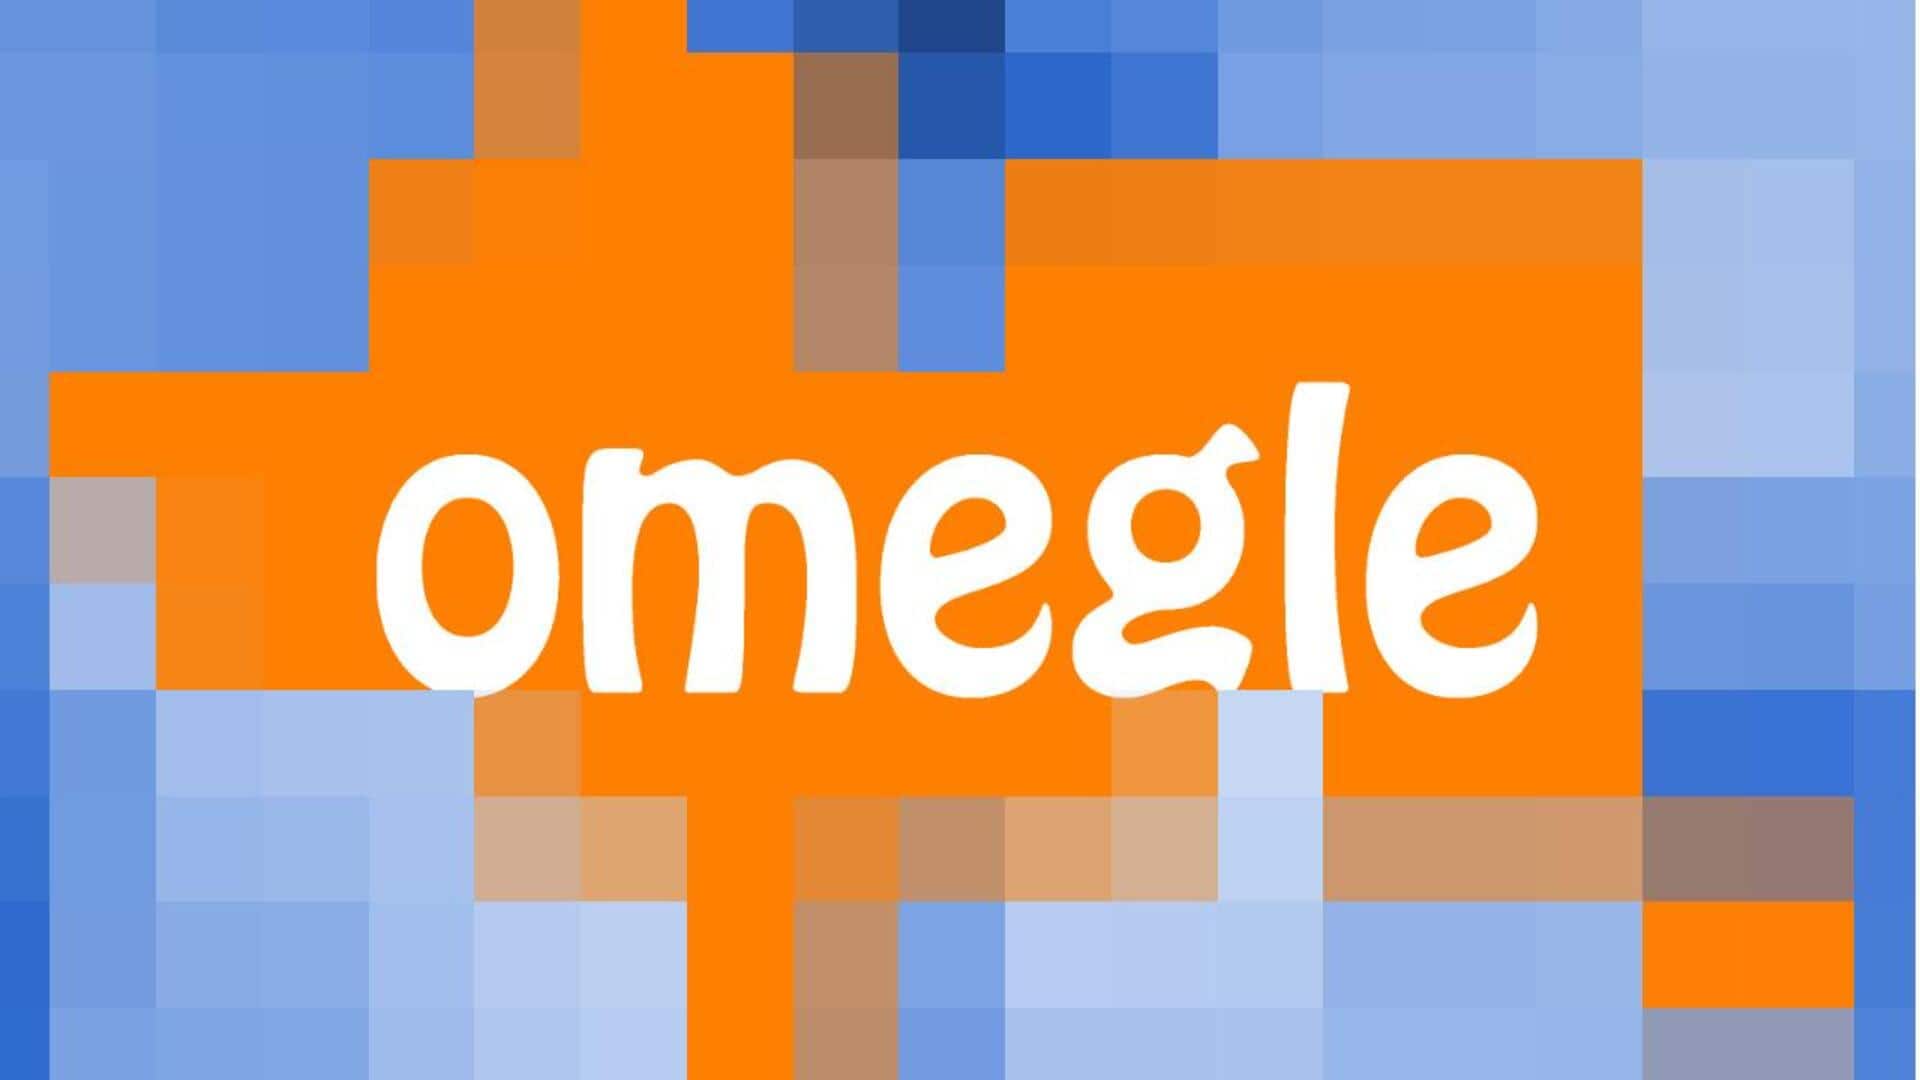 End of an Era: Popular chat website Omegle forced to shut down for aiding  'heinous crimes